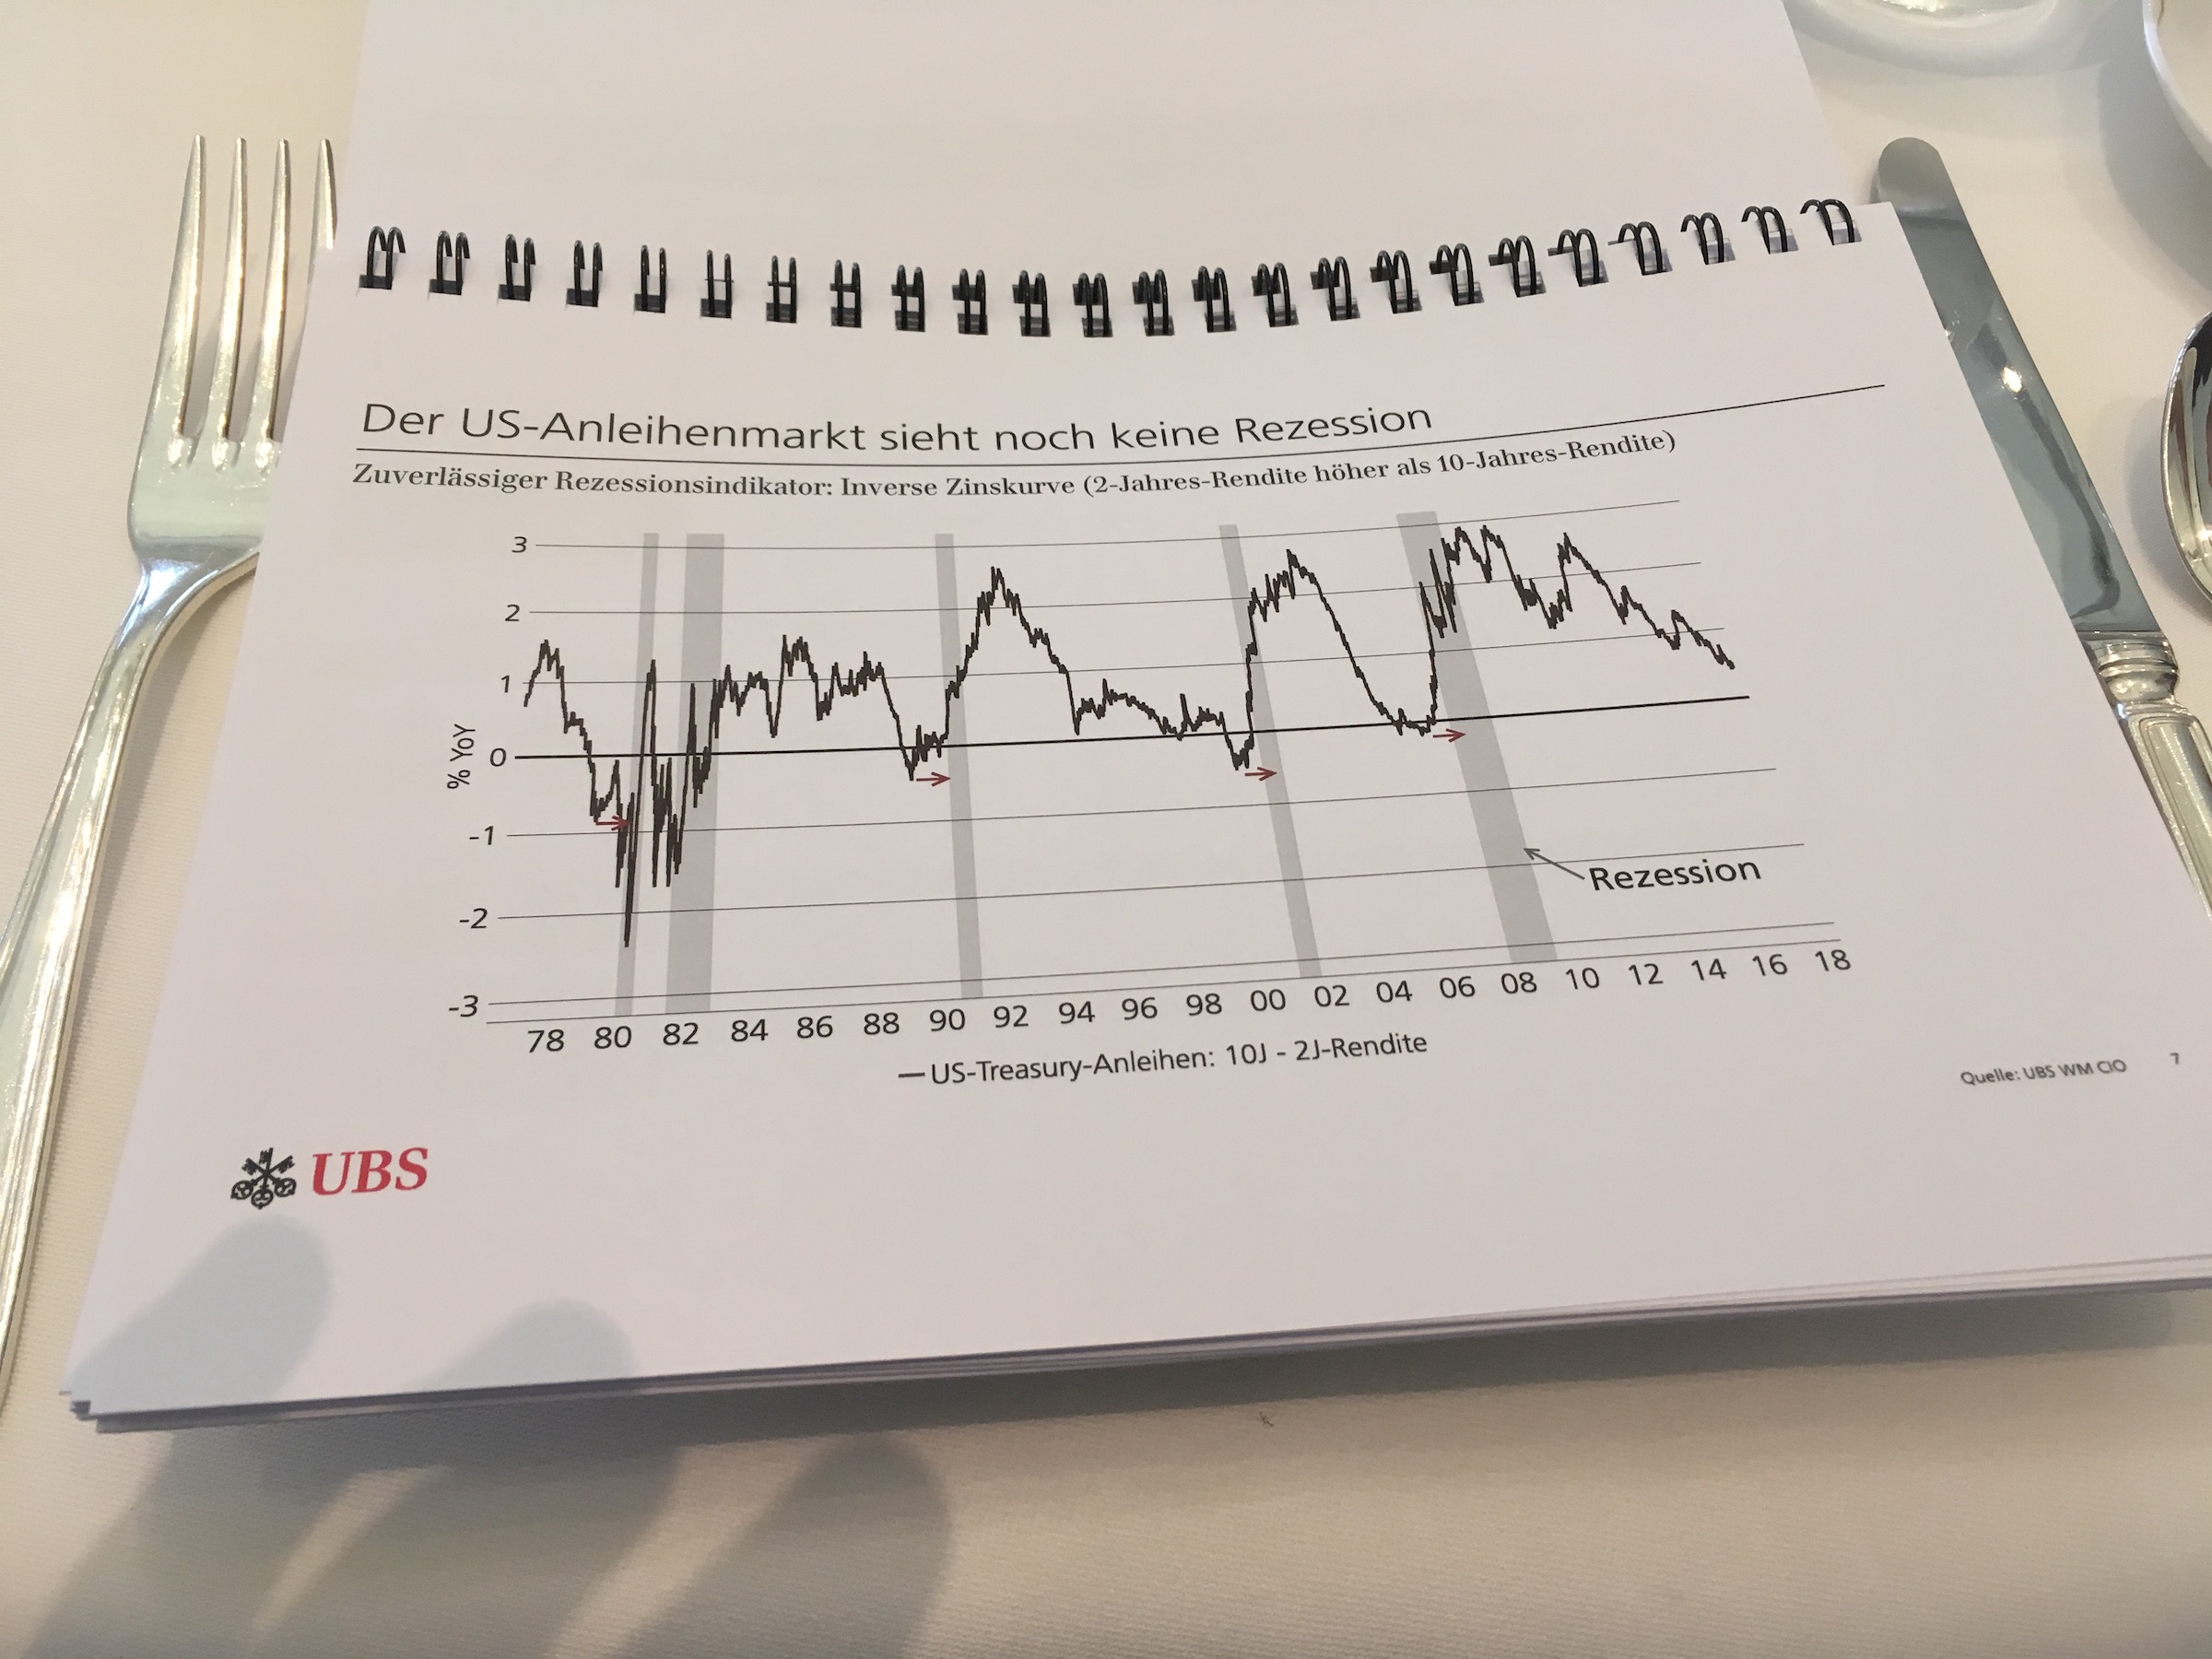 UBS chief economist Dr. Daniel Kalt on the fact that there is no recession around the corner yet